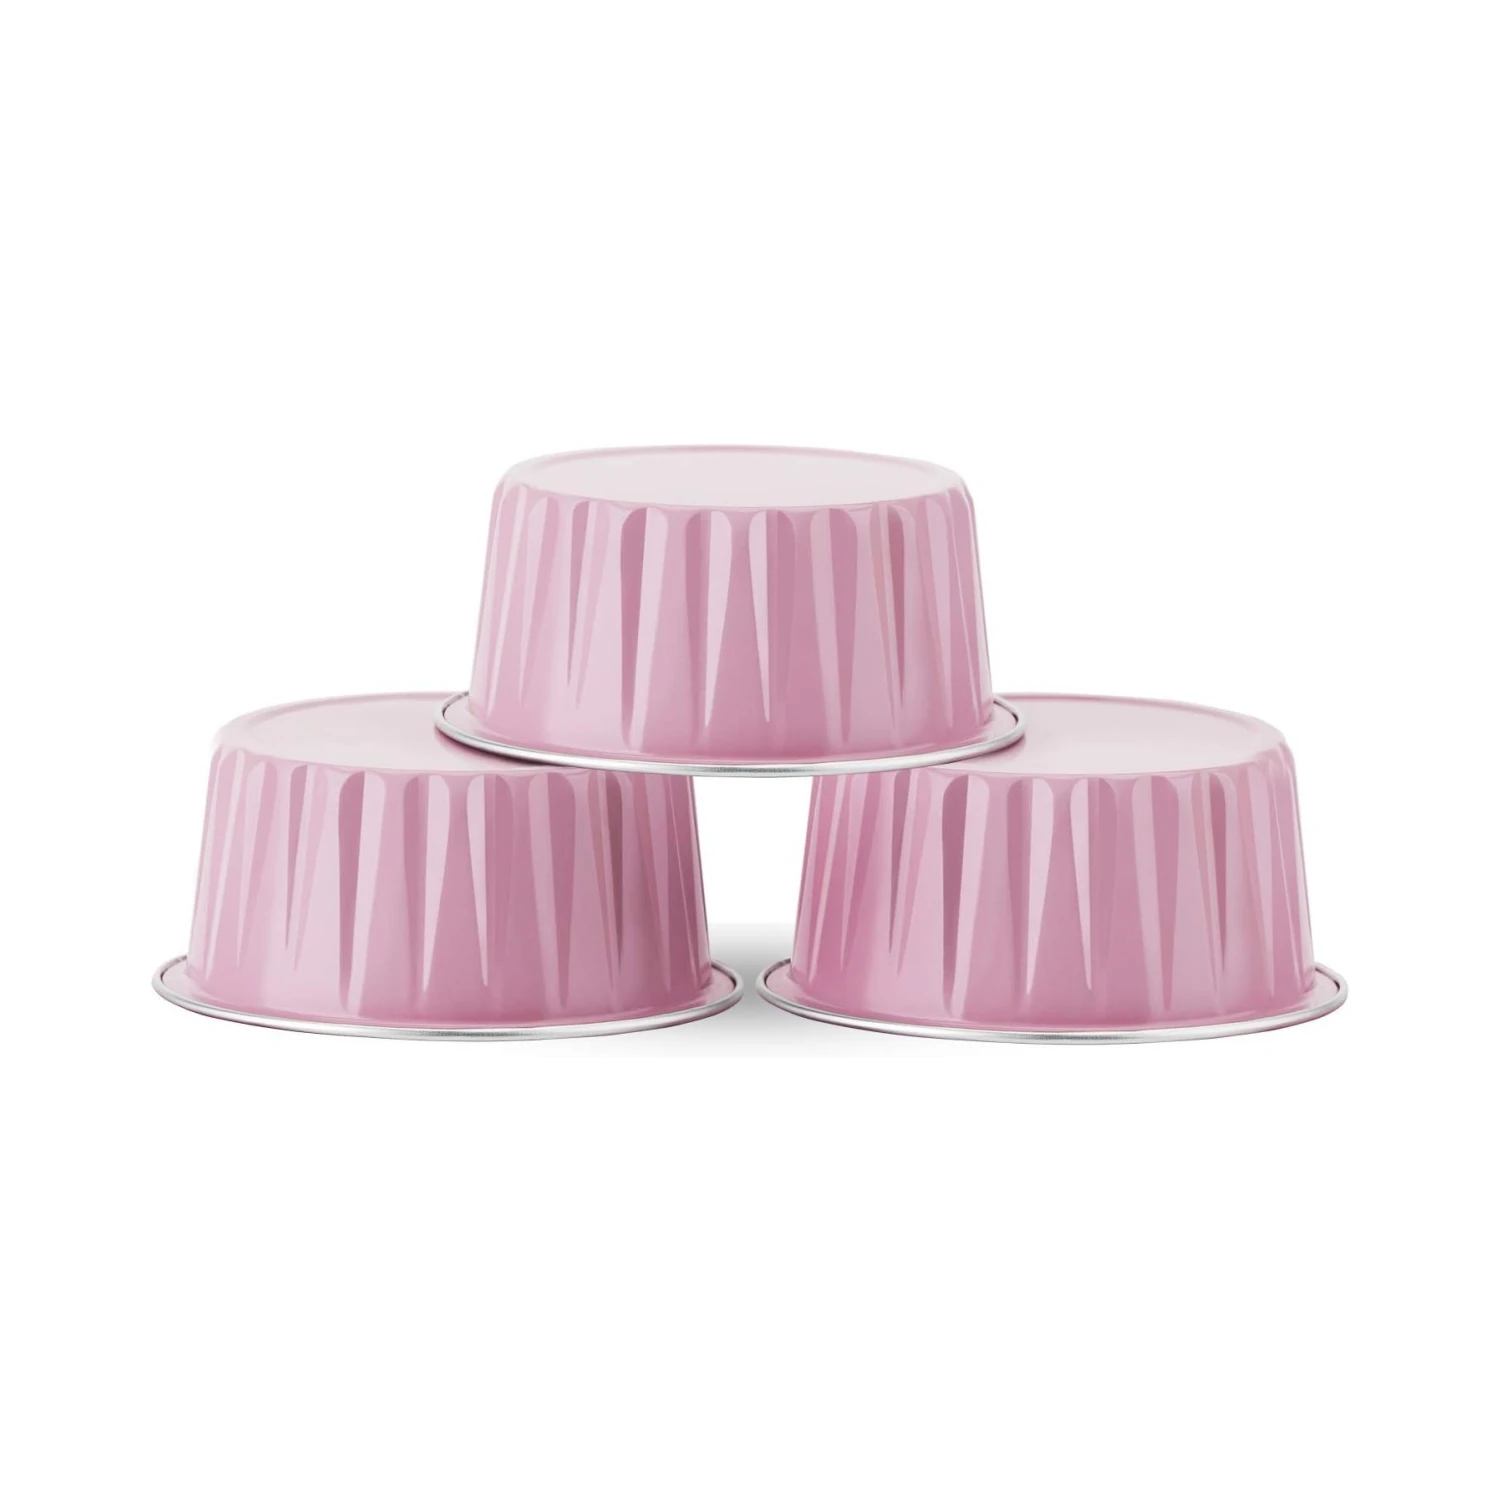 https://ae01.alicdn.com/kf/S75284f8891ad4858a273e0fc53303cc0G/20Packs-5oz-Baking-Cups-with-Lids-Pink-Disposable-Aluminum-Foil-Mini-Muffin-Liners-Dessert-Cheesecake-Pan.jpg